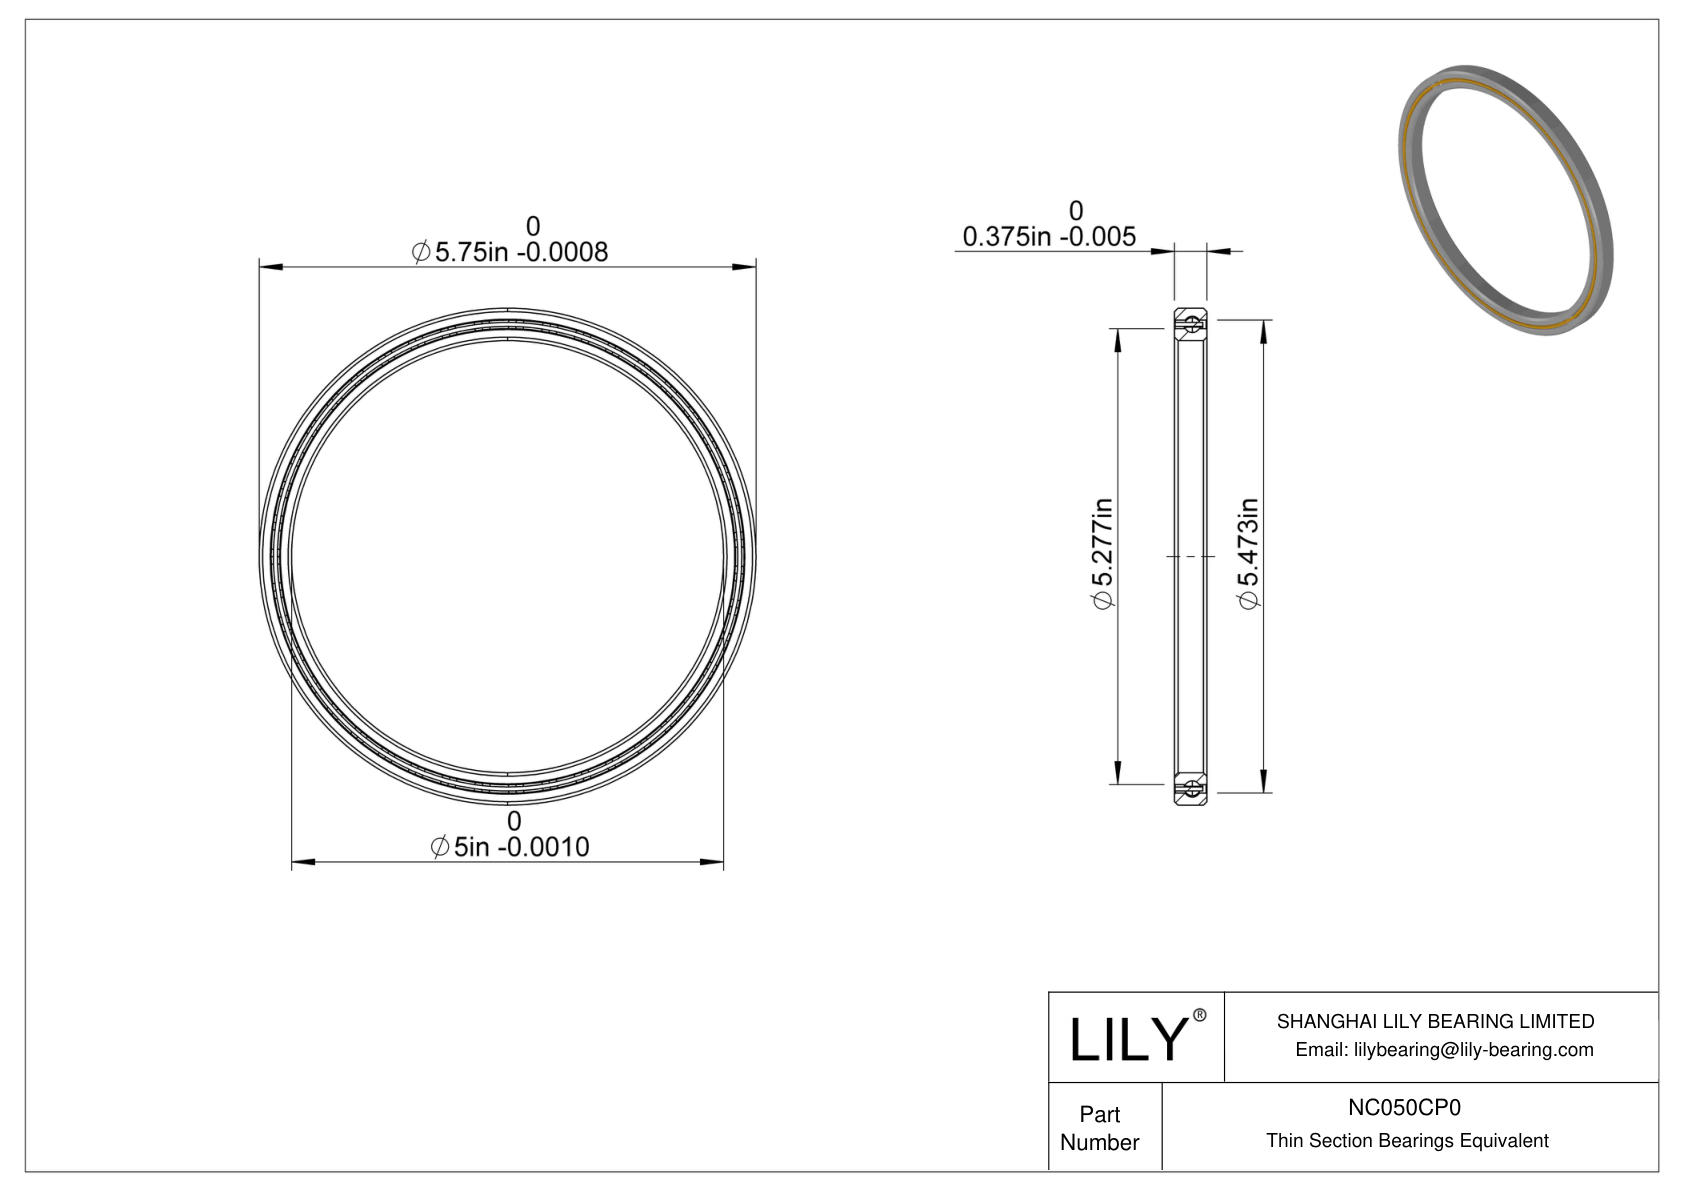 NC050CP0 Constant Section (CS) Bearings cad drawing